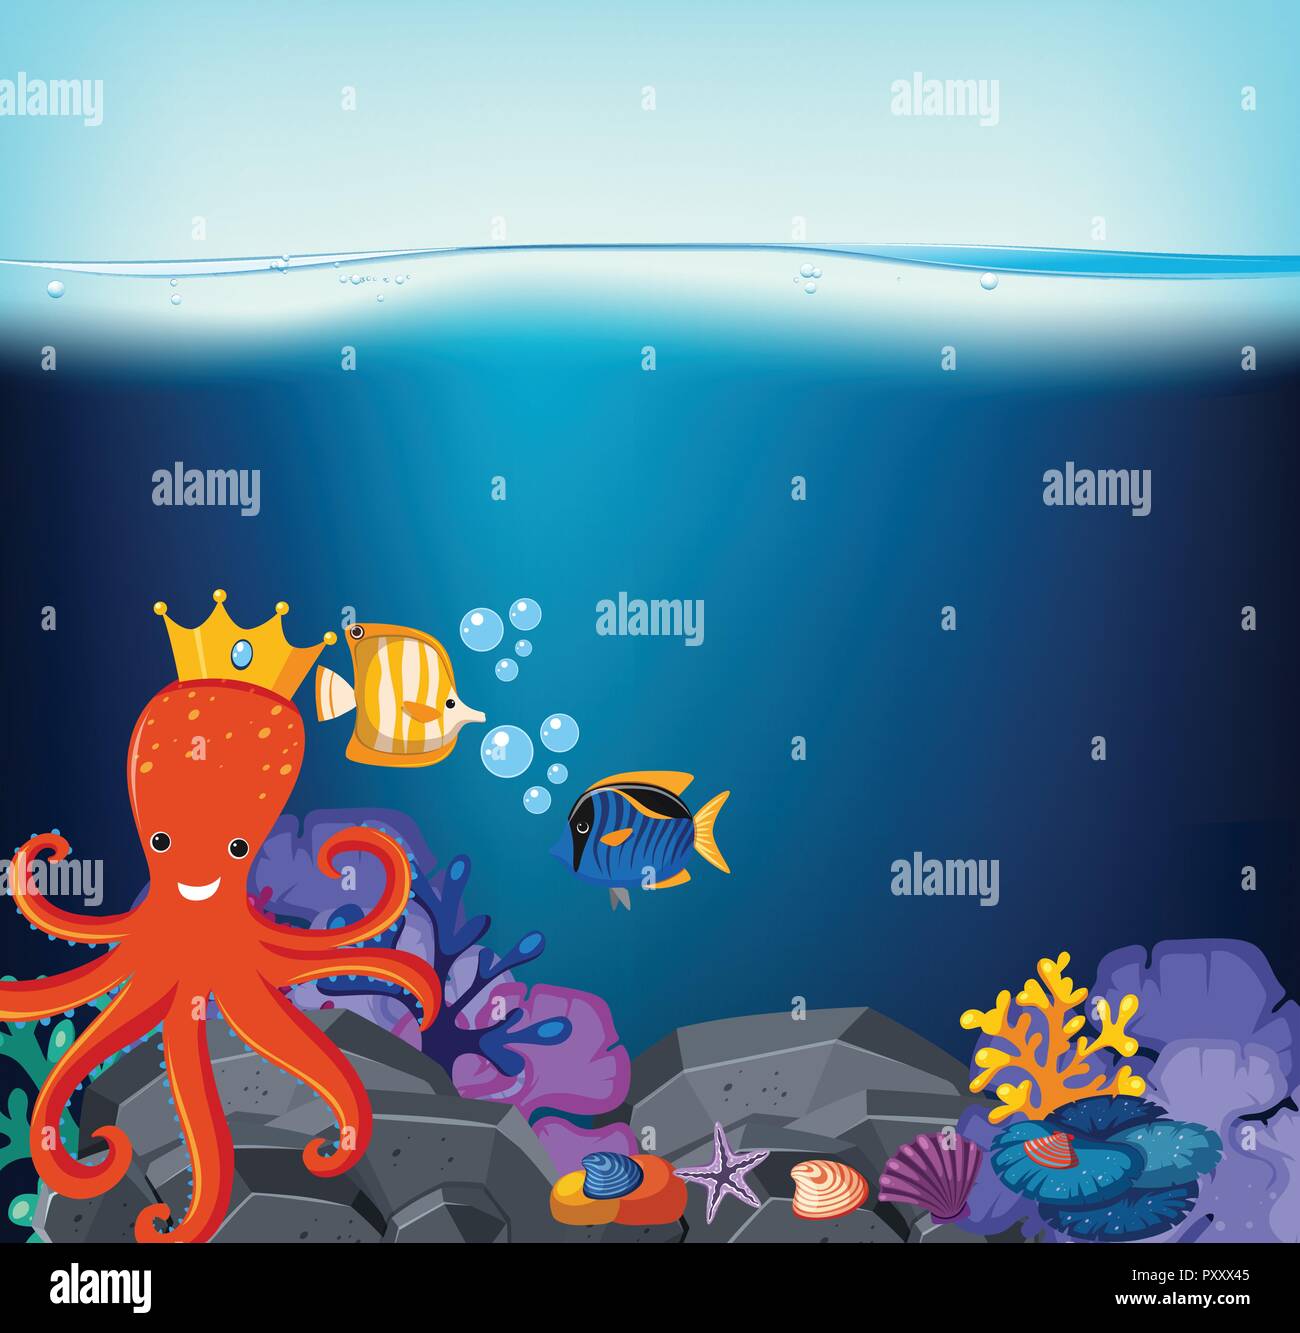 Underwater scene with octopus and fish illustration Stock Vector